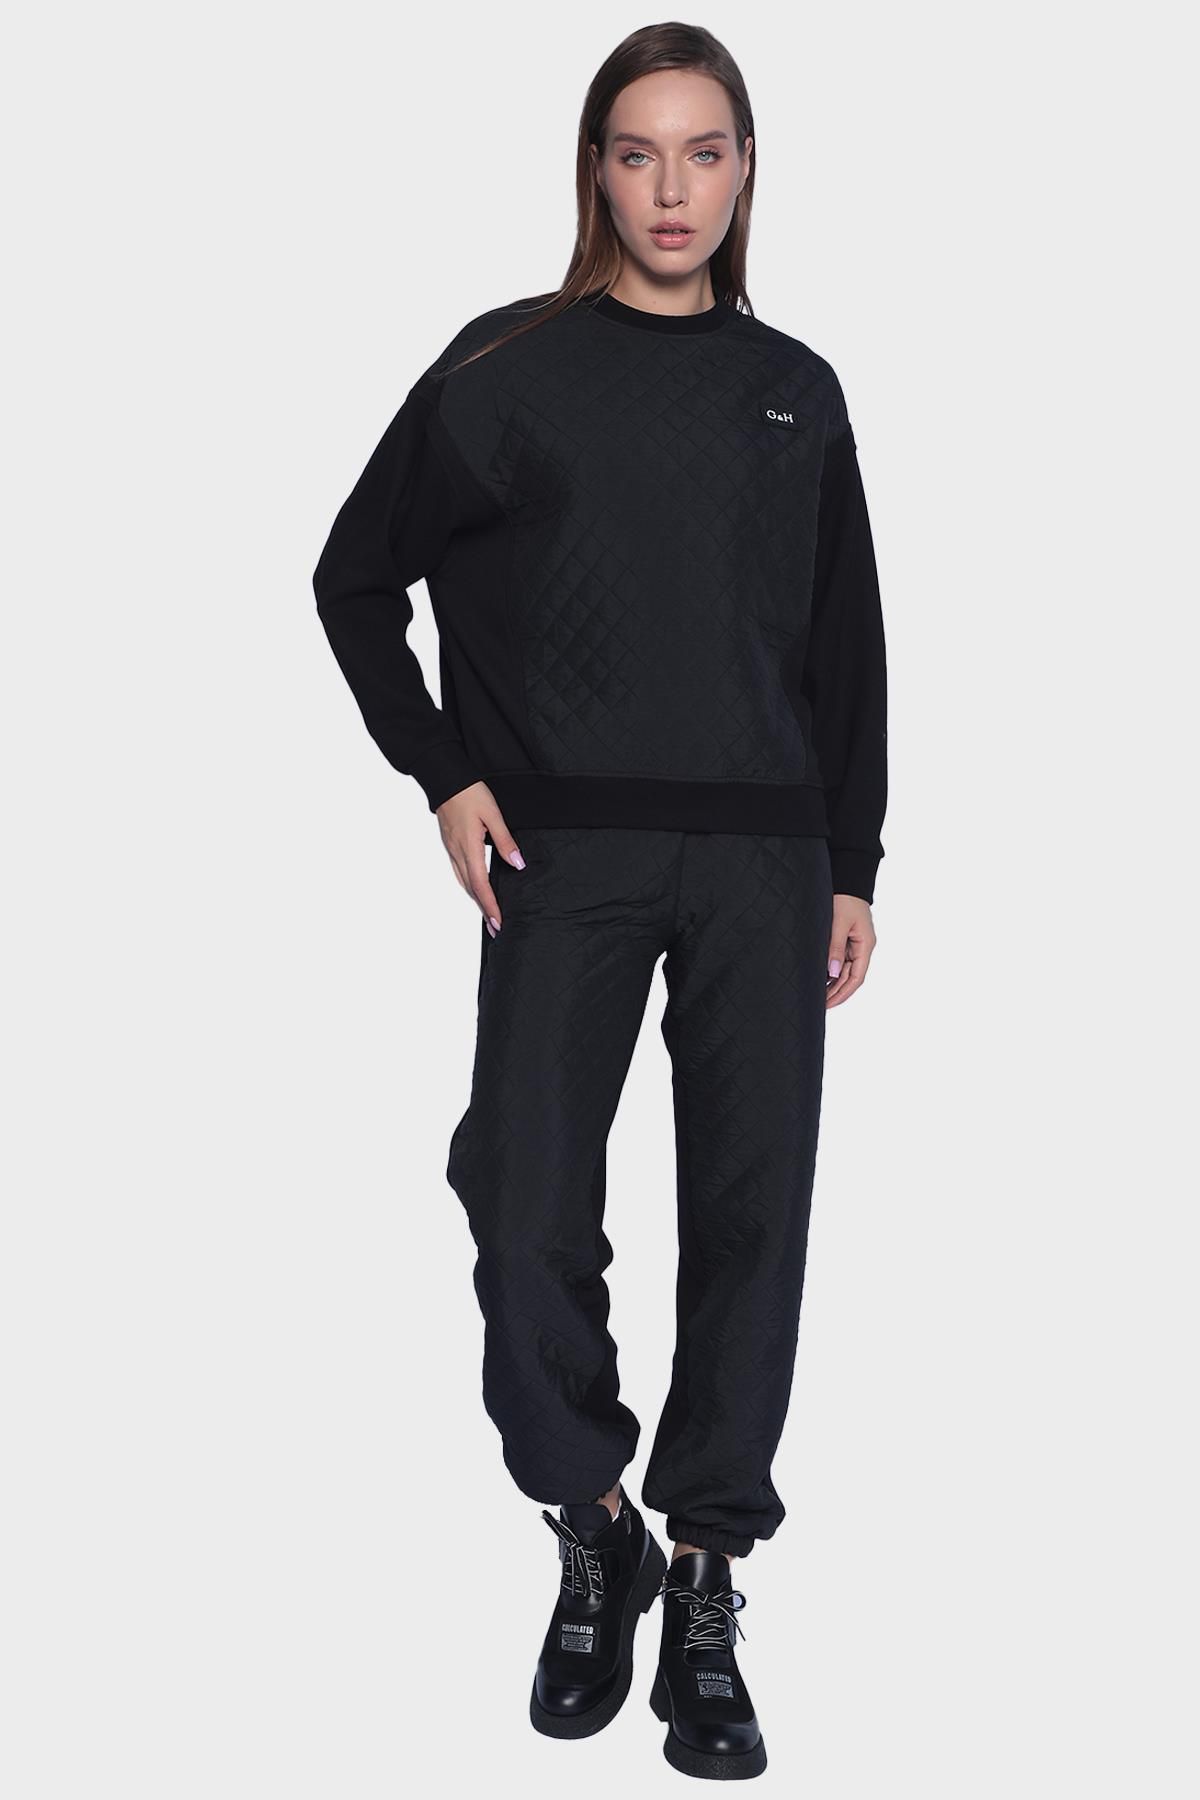 Womens Sports Style Quilted Sweatshirt and Sweatpants Set - Black